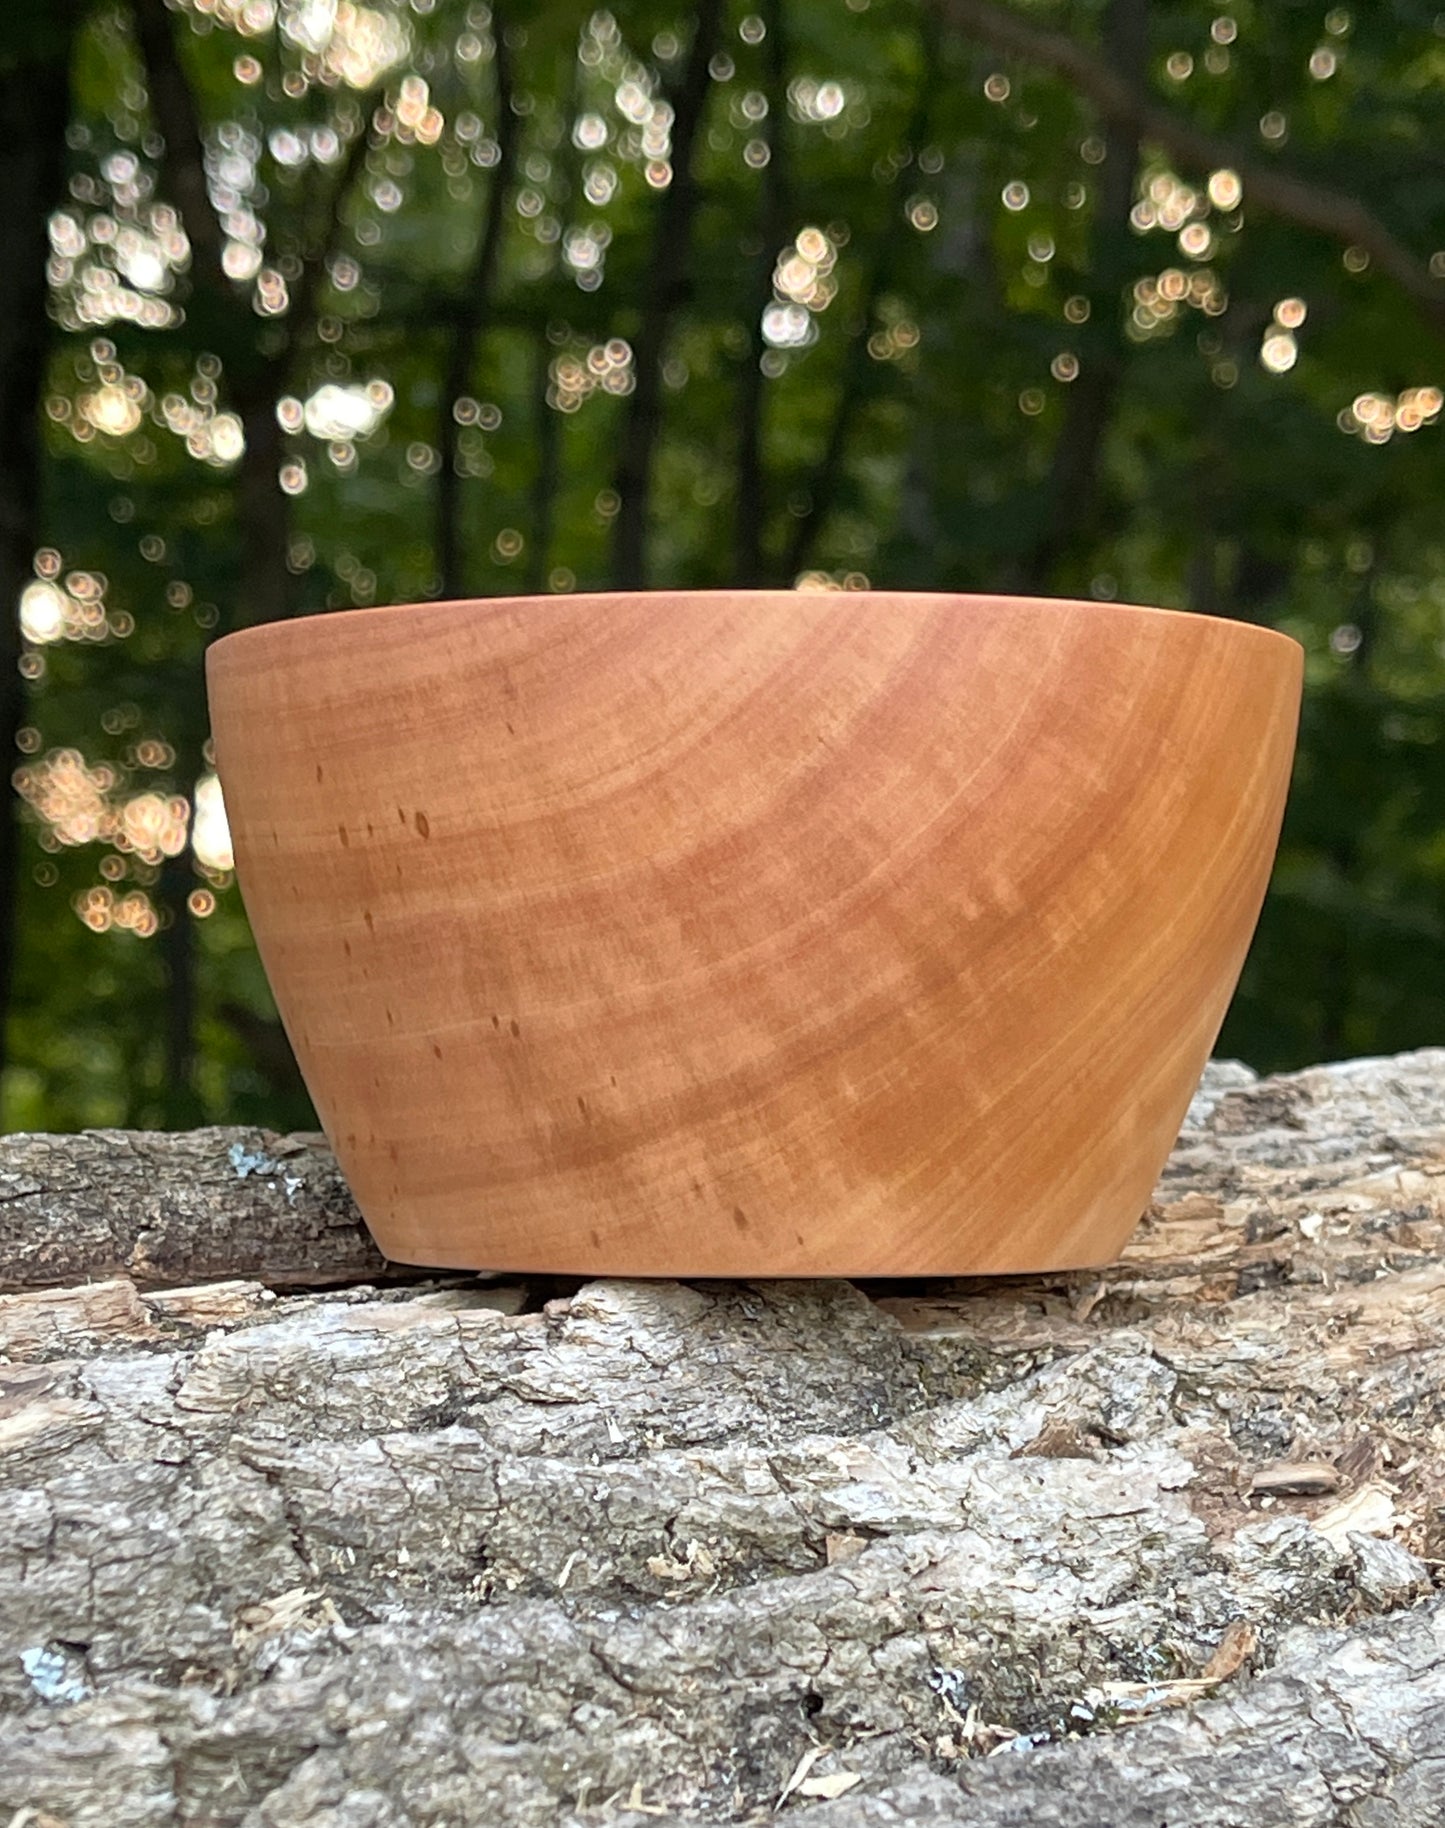 Pear - Extra Small (5inch) Bowl